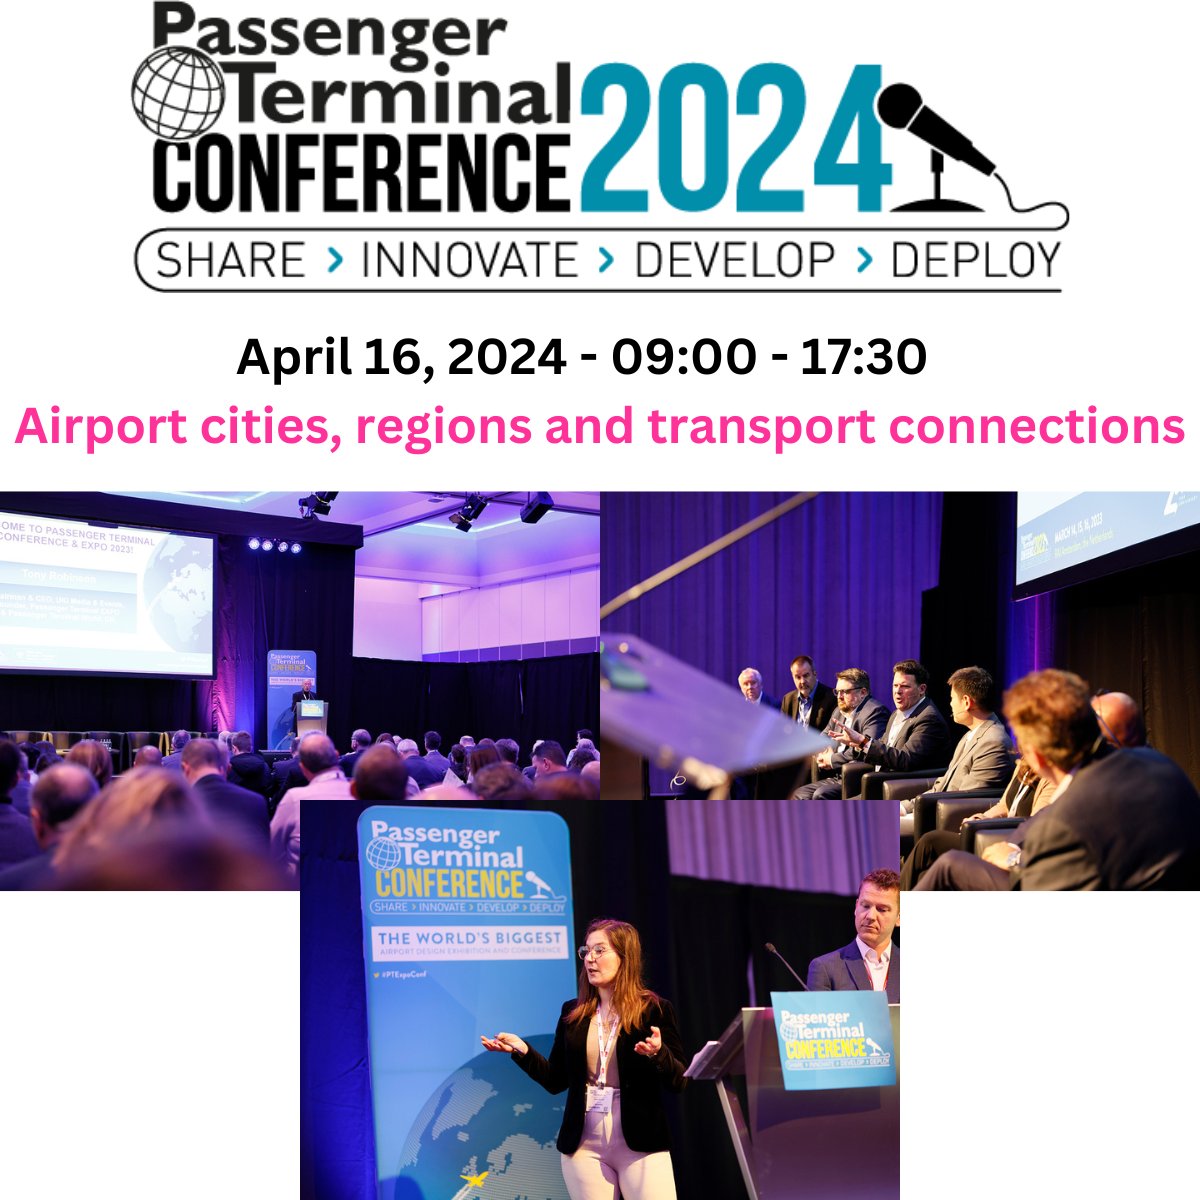 🔊 April 16, 2024 #PTExpoConf - 09:00 - 17:30 - ✈️ #Airport cities, regions and #transport connections – track spotlight 🔦 Check out the latest line up! Book your place today: bit.ly/48PXiUI View the full conference program: bit.ly/3TPvMCu